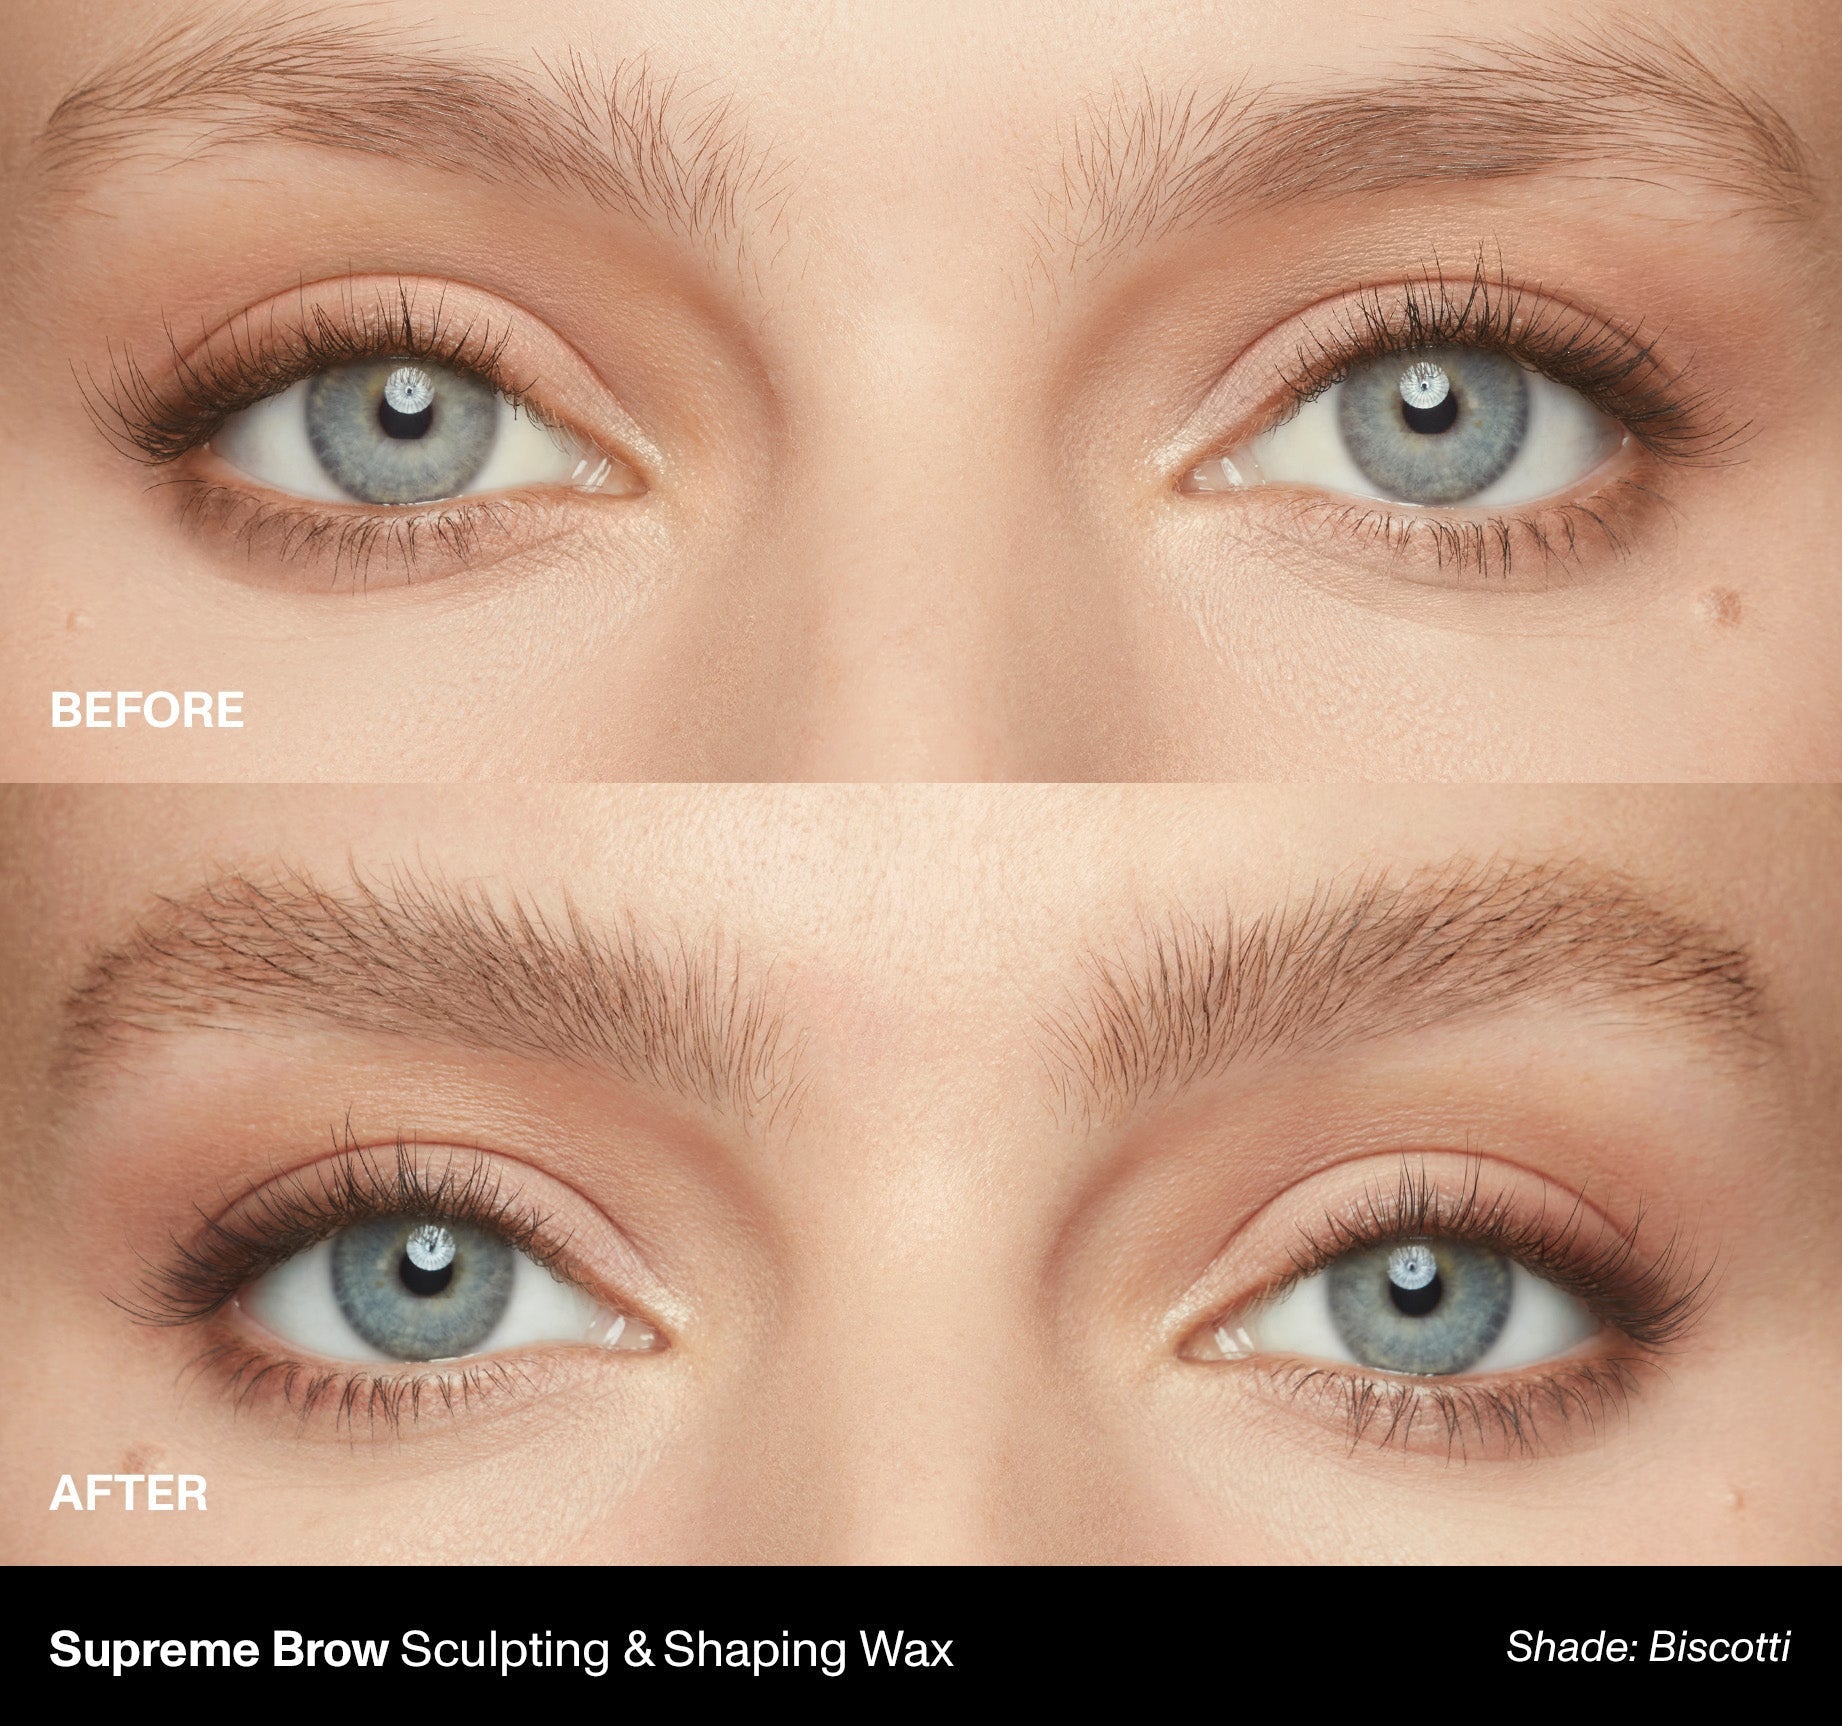 Supreme Brow Sculpting And Shaping Wax - Biscotti - Image 6